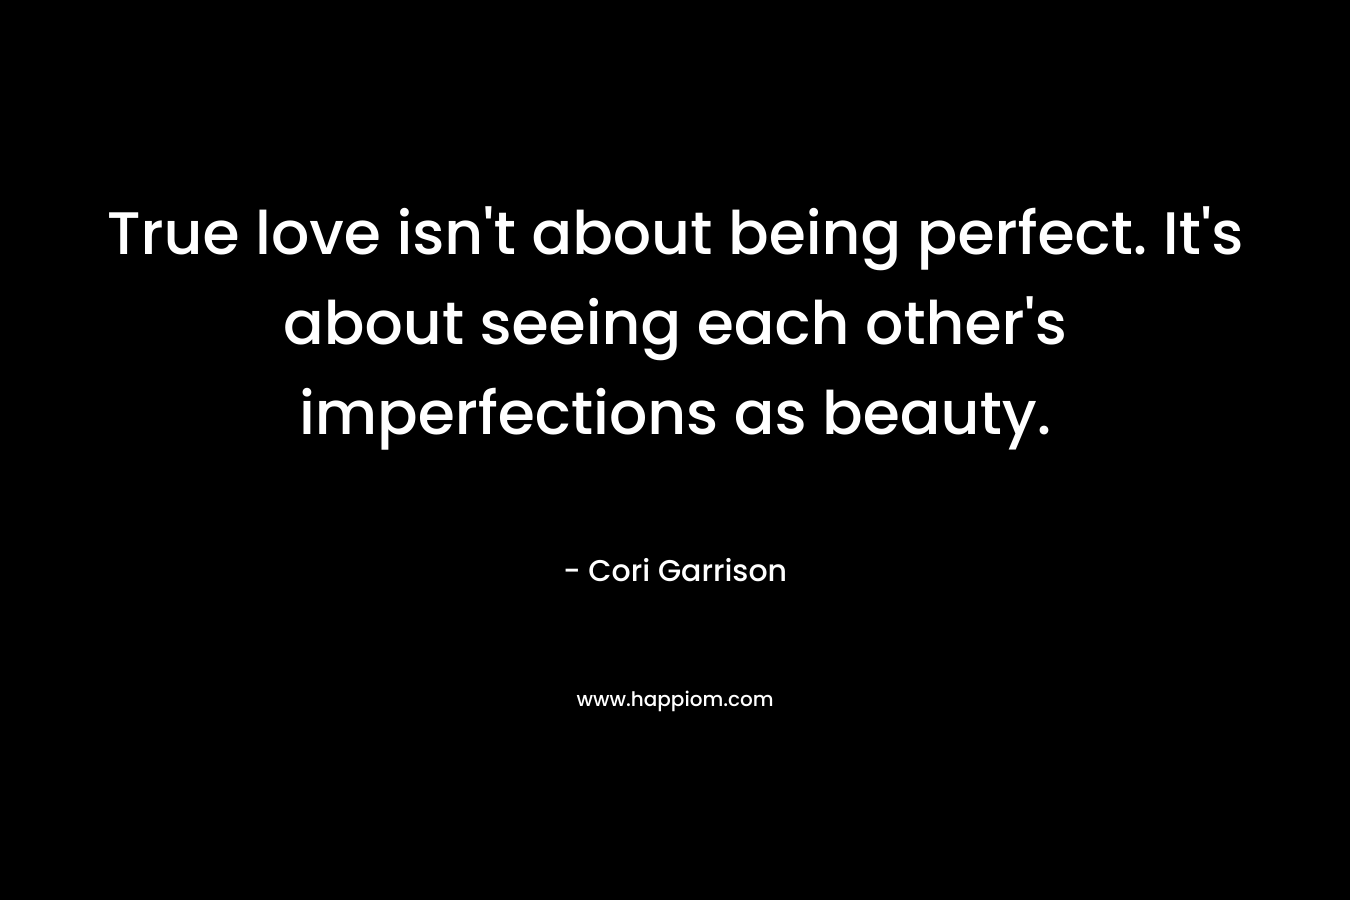 True love isn't about being perfect. It's about seeing each other's imperfections as beauty.